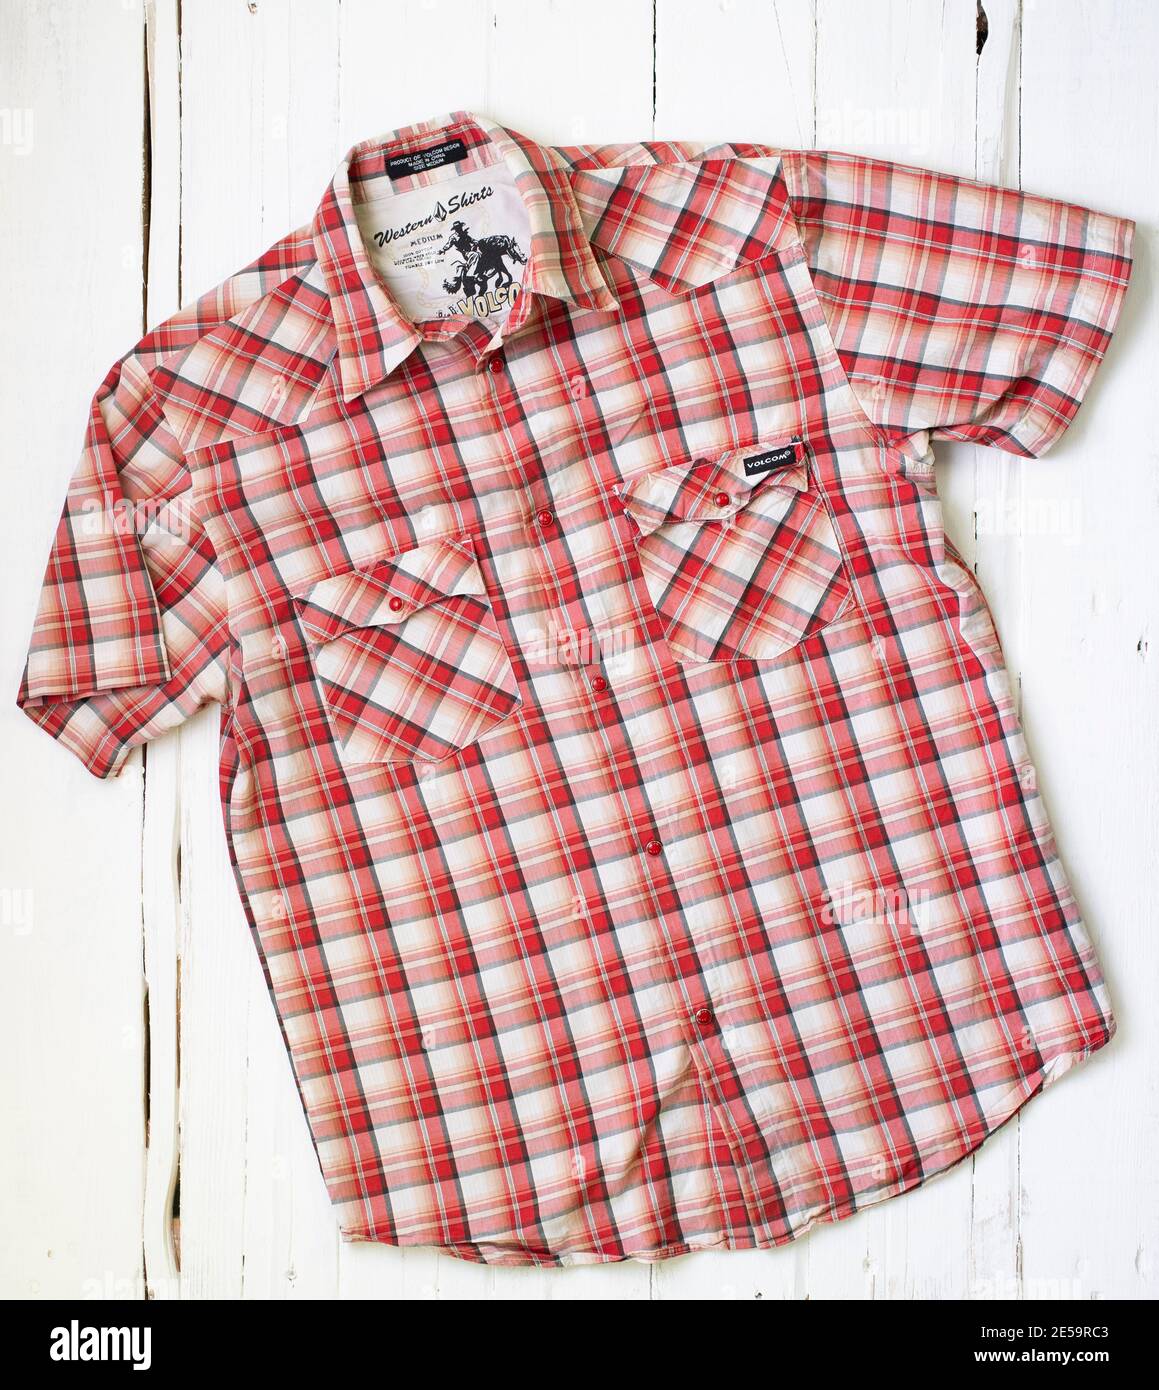 A red checked Volcom shirt on a white wooden background Stock Photo